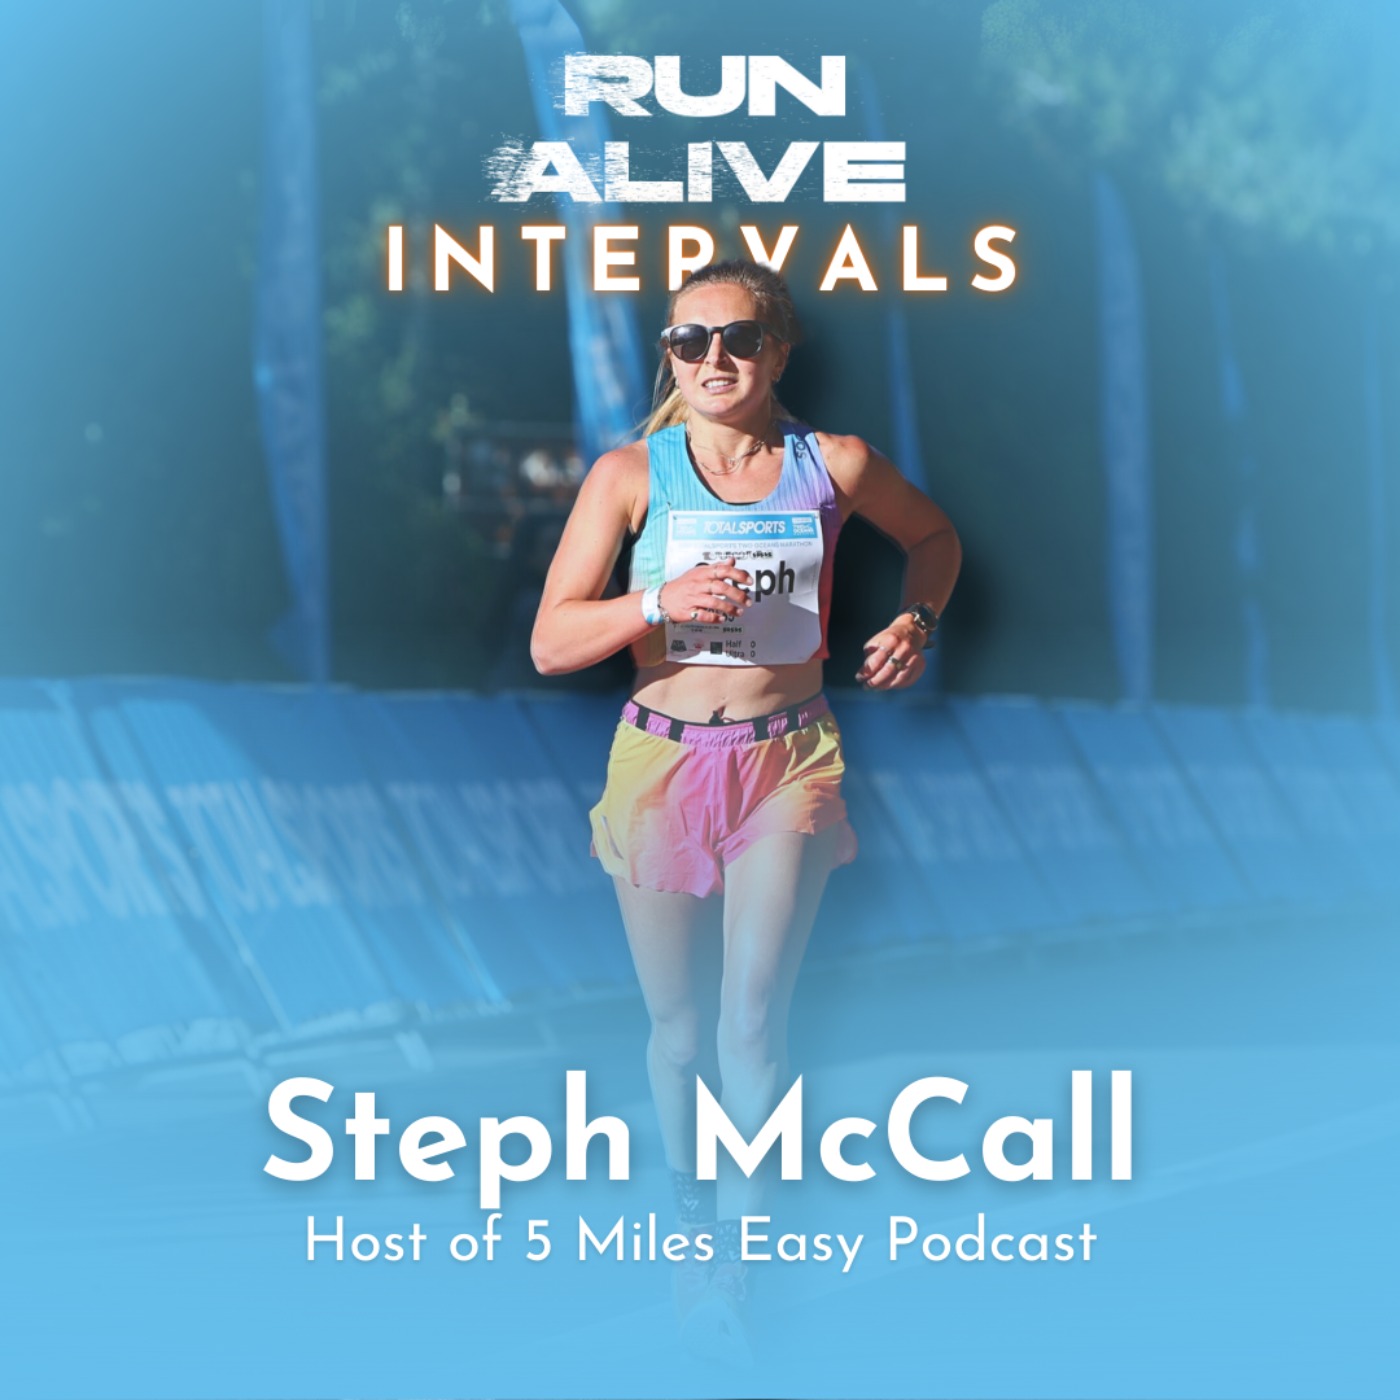 Endurance and Enjoyment: Steph McCall on ultra marathons, community and life lessons